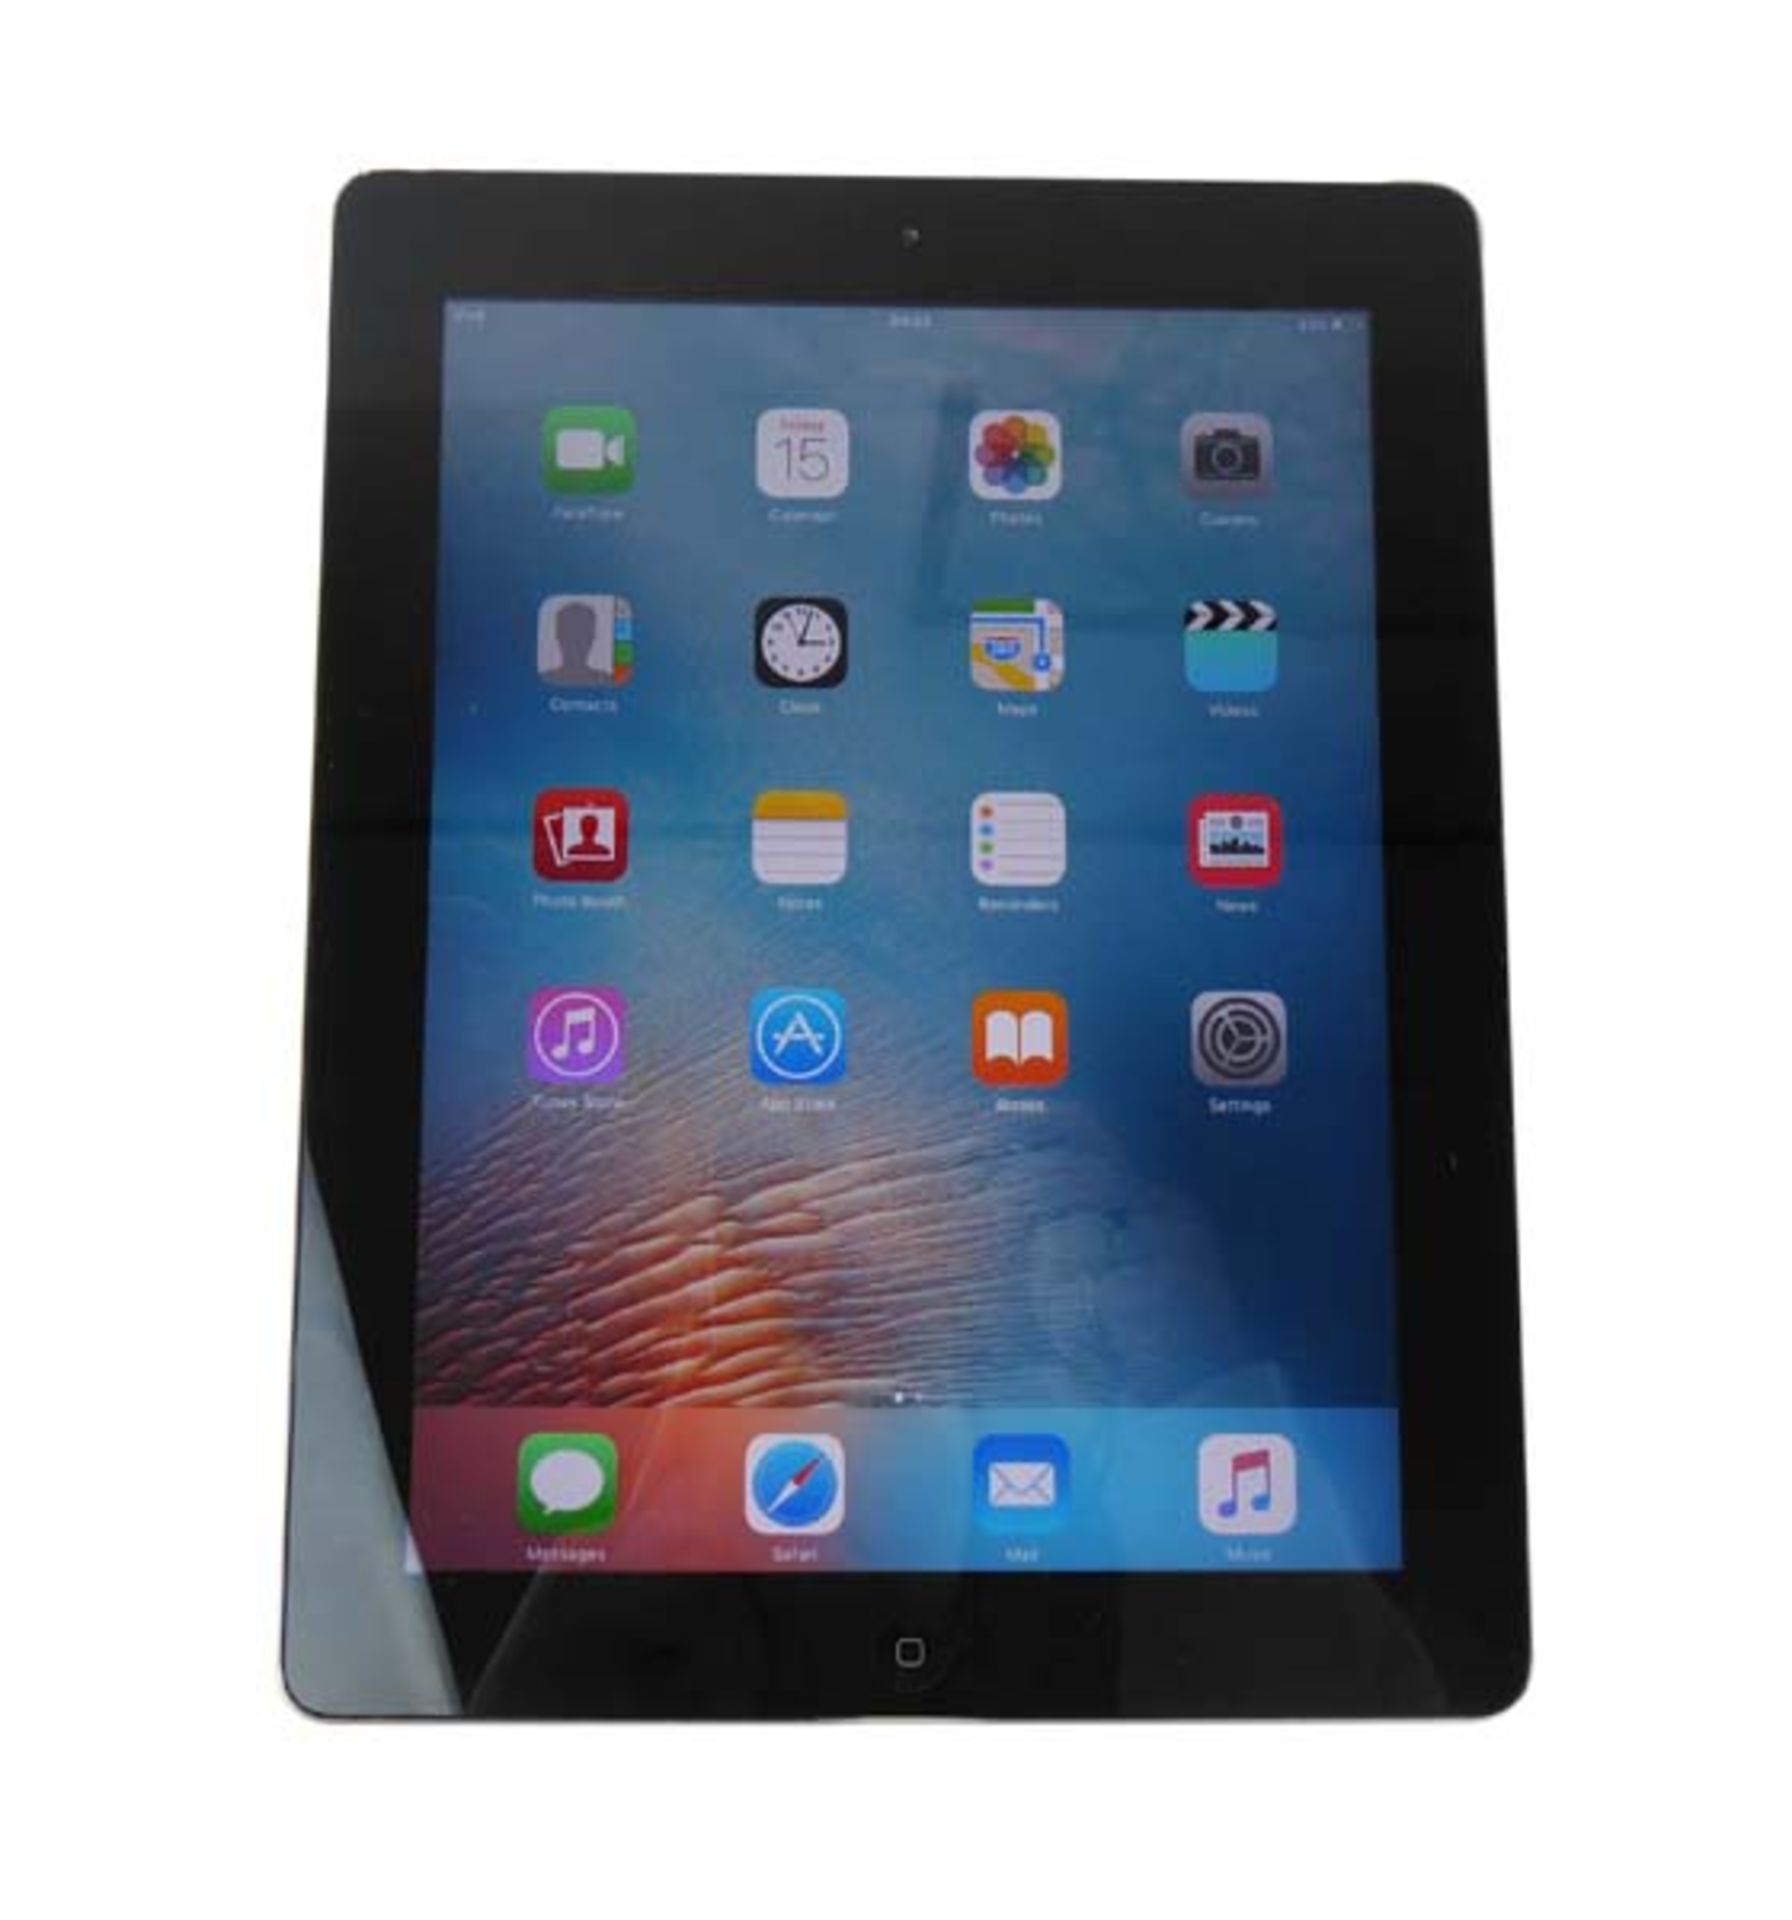 iPad 16GB Black tablet with box and cable (A1395 2011)